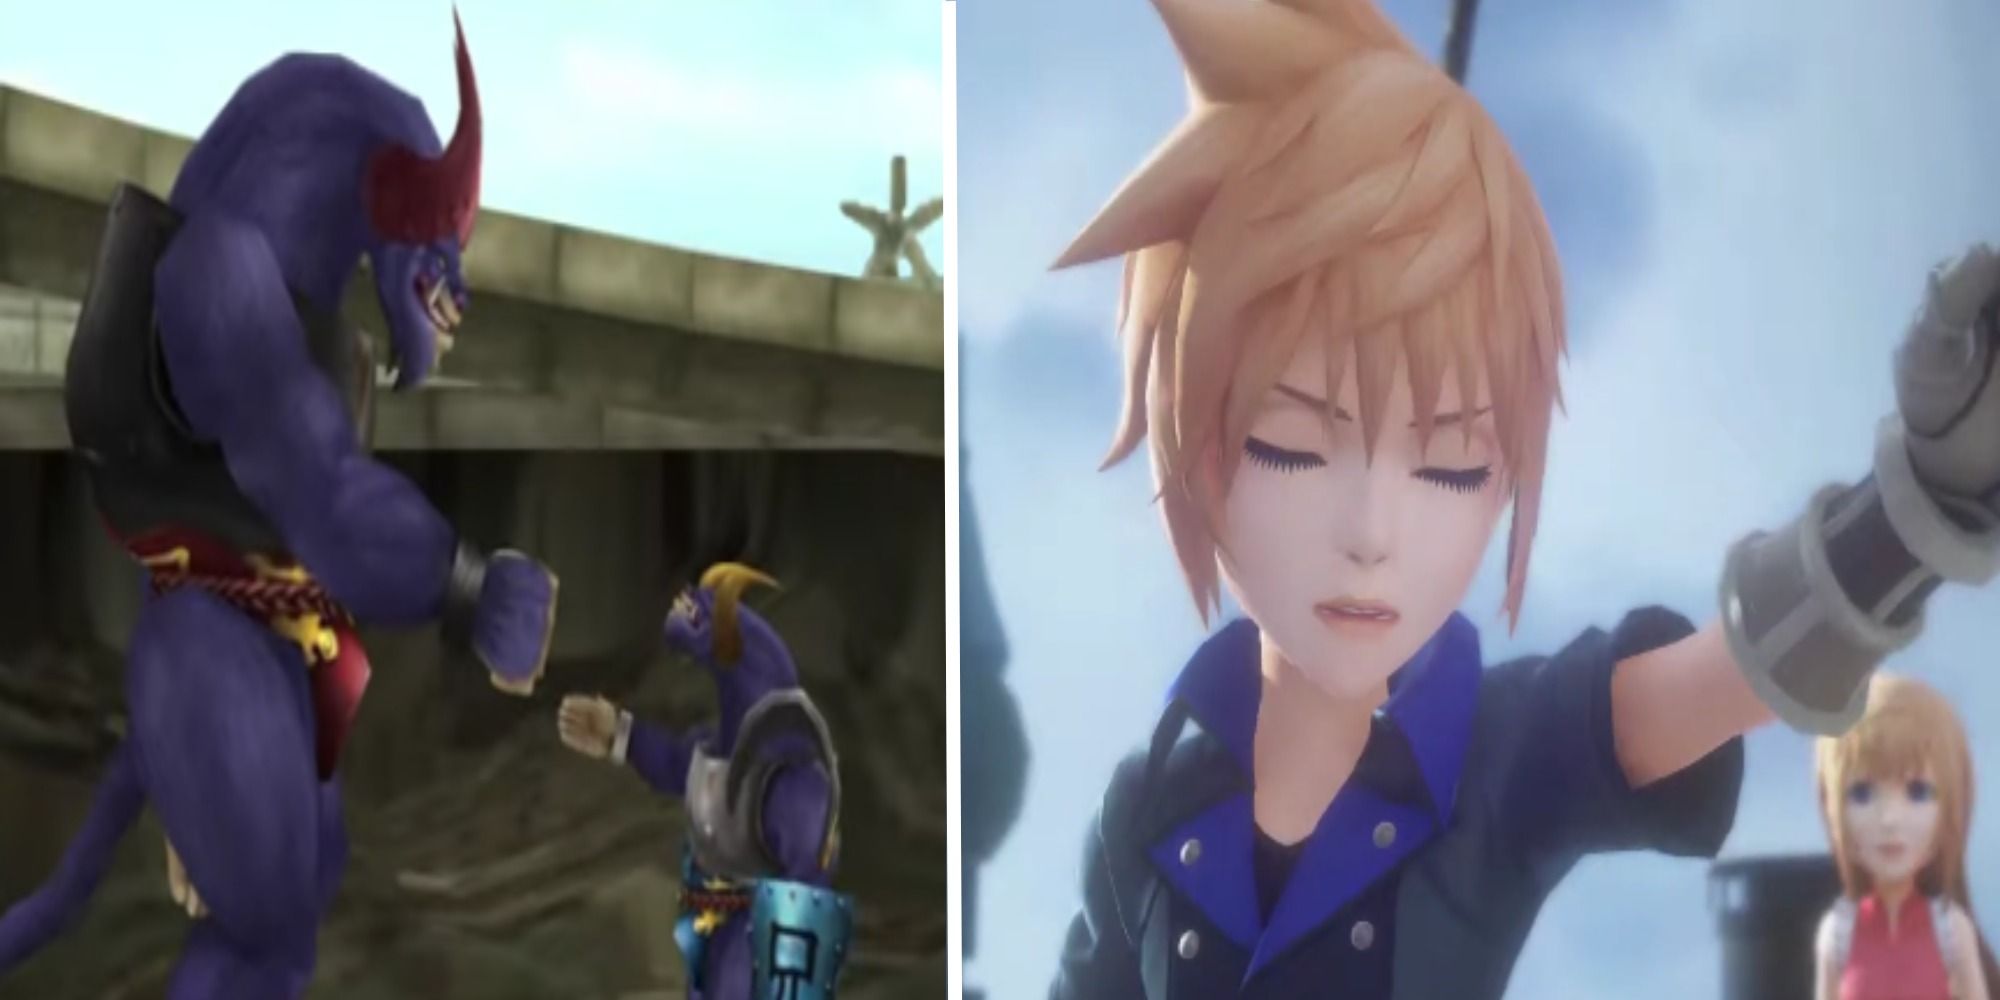 Final Fantasy split image Brothers Guardian Force Final Fantasy 8 and Lann attacking in World of Final Fantasy